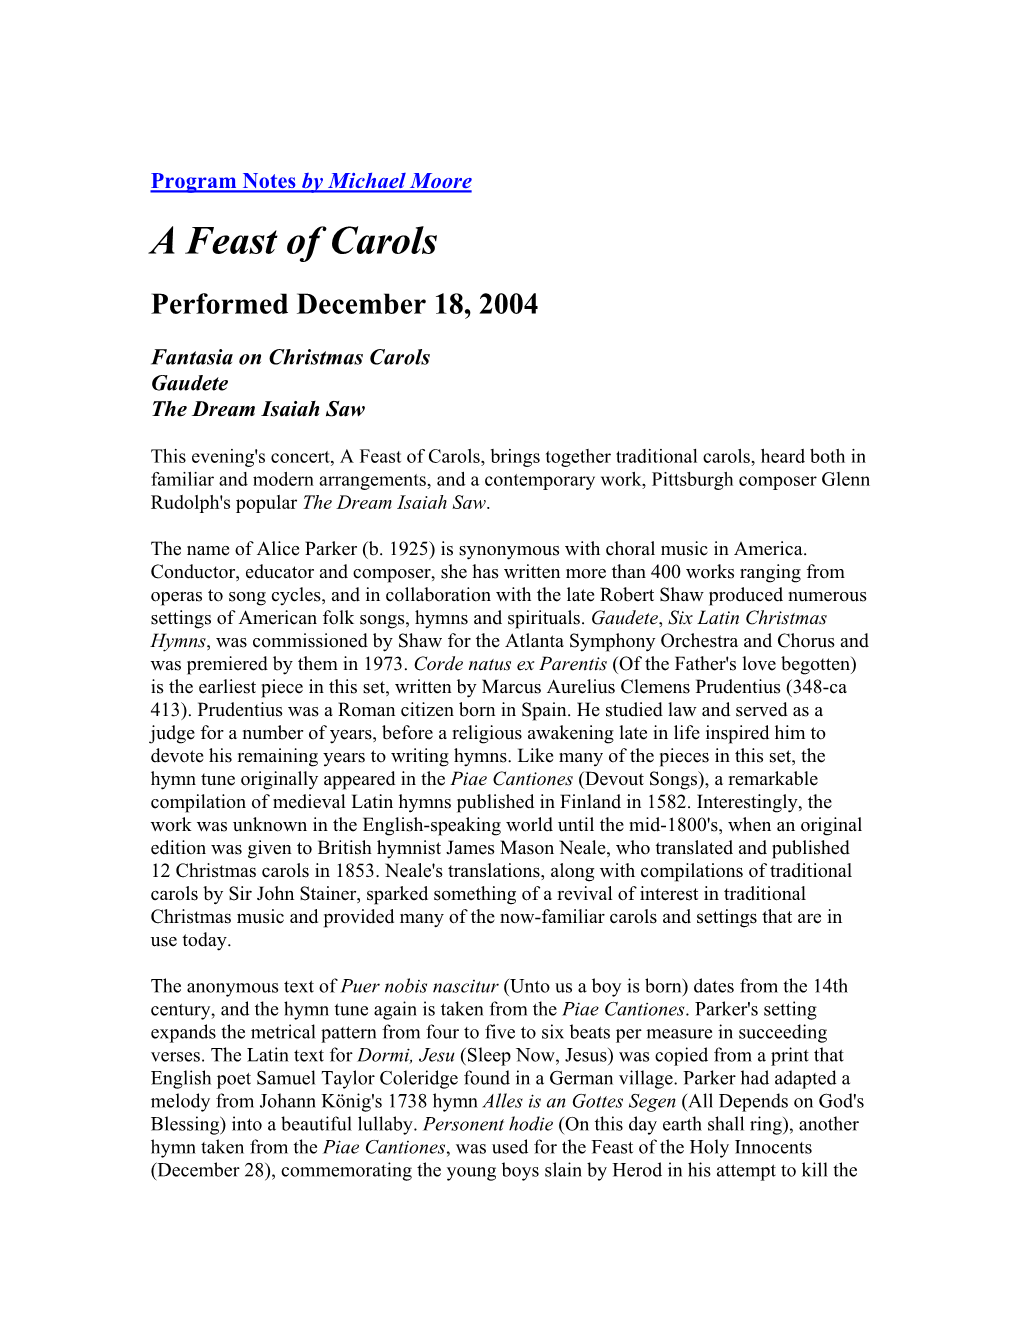 Program Notes by Michael Moore a Feast of Carols Performed December 18, 2004